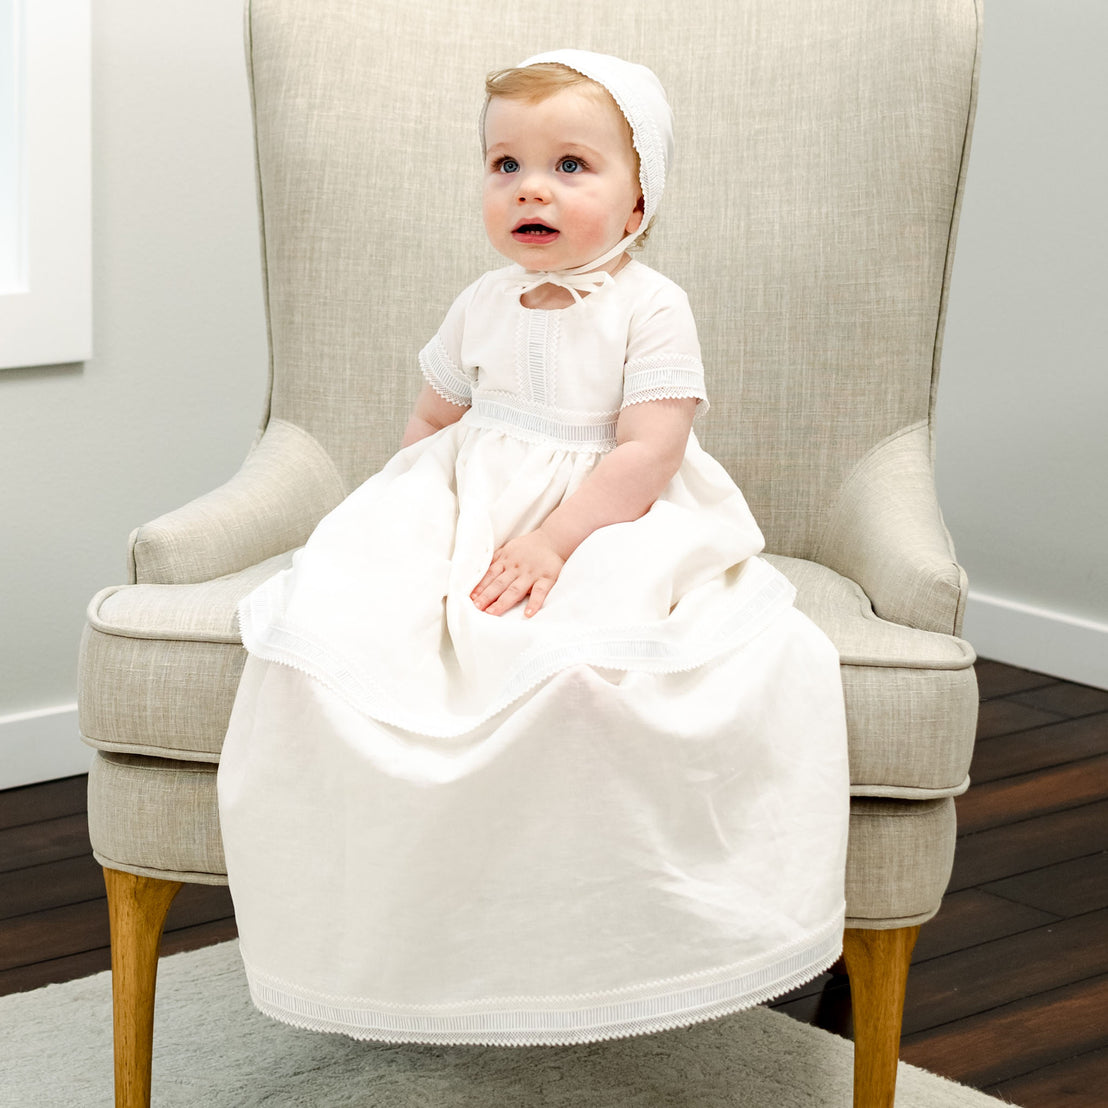 Baby boy making a funny face wearing the Rowan linen boys baptism gown.